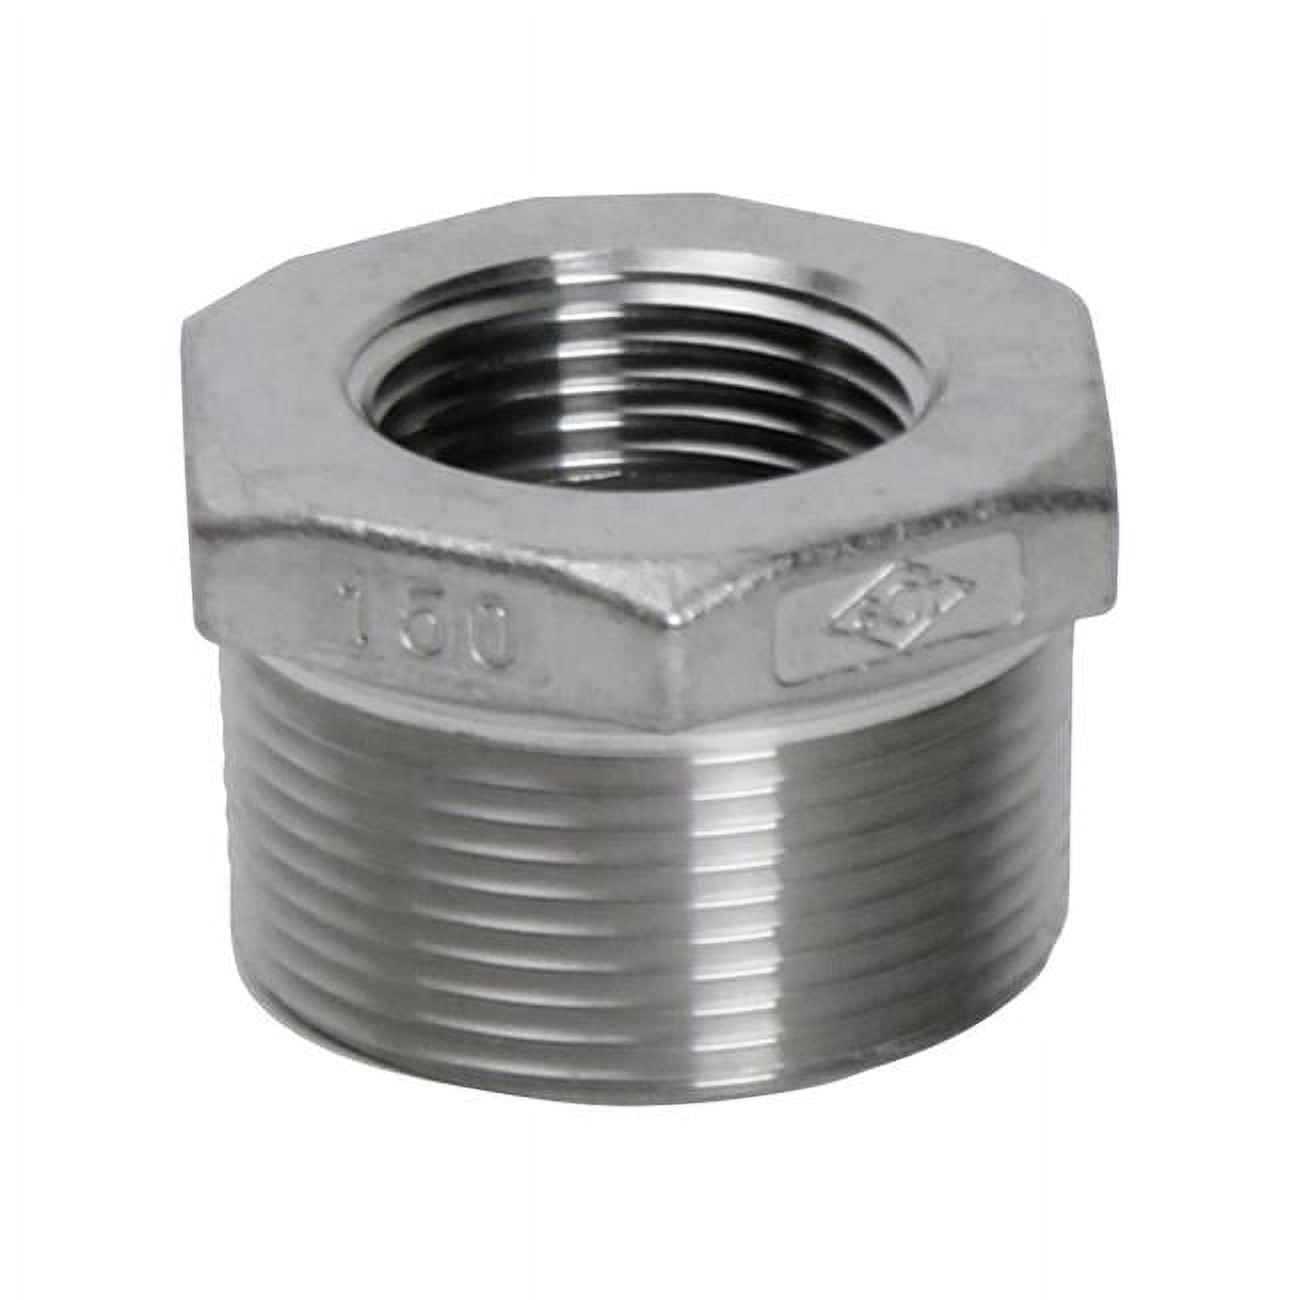 4810636 Stainless Steel Hex Bushing - 1 In. X 0.75 Dia.